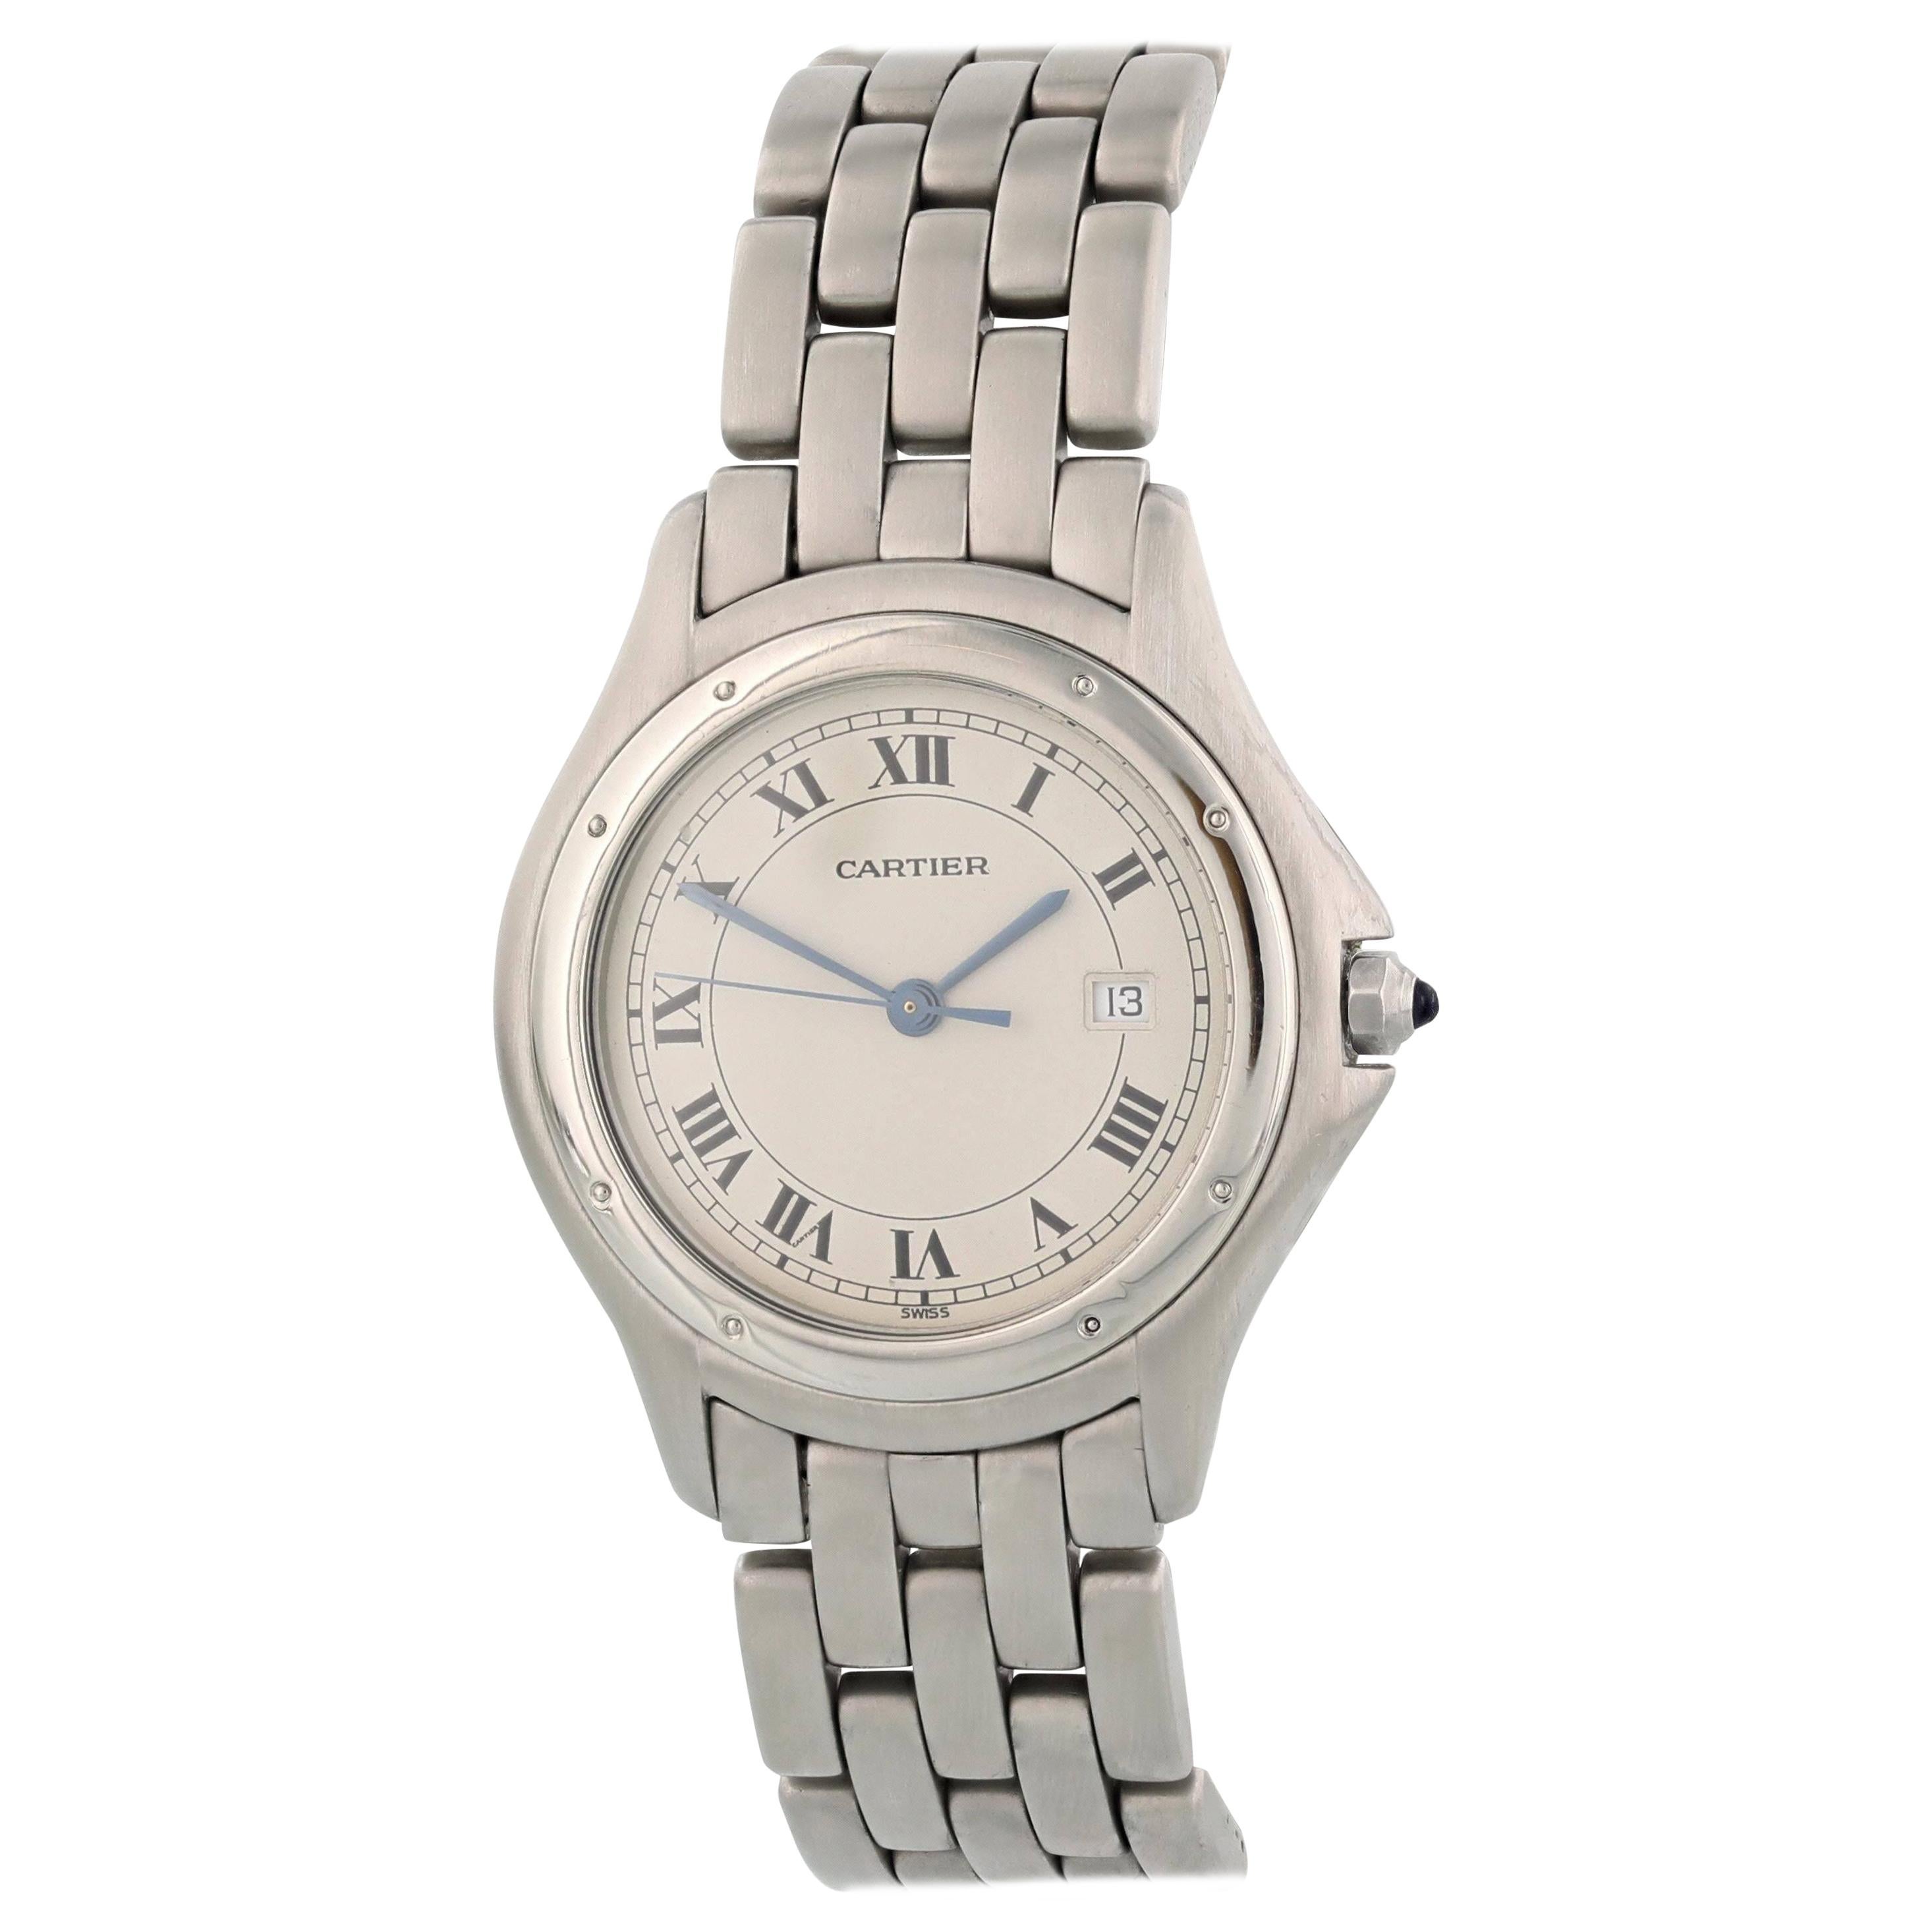 Cartier Cougar 987904 Laides Watch For Sale